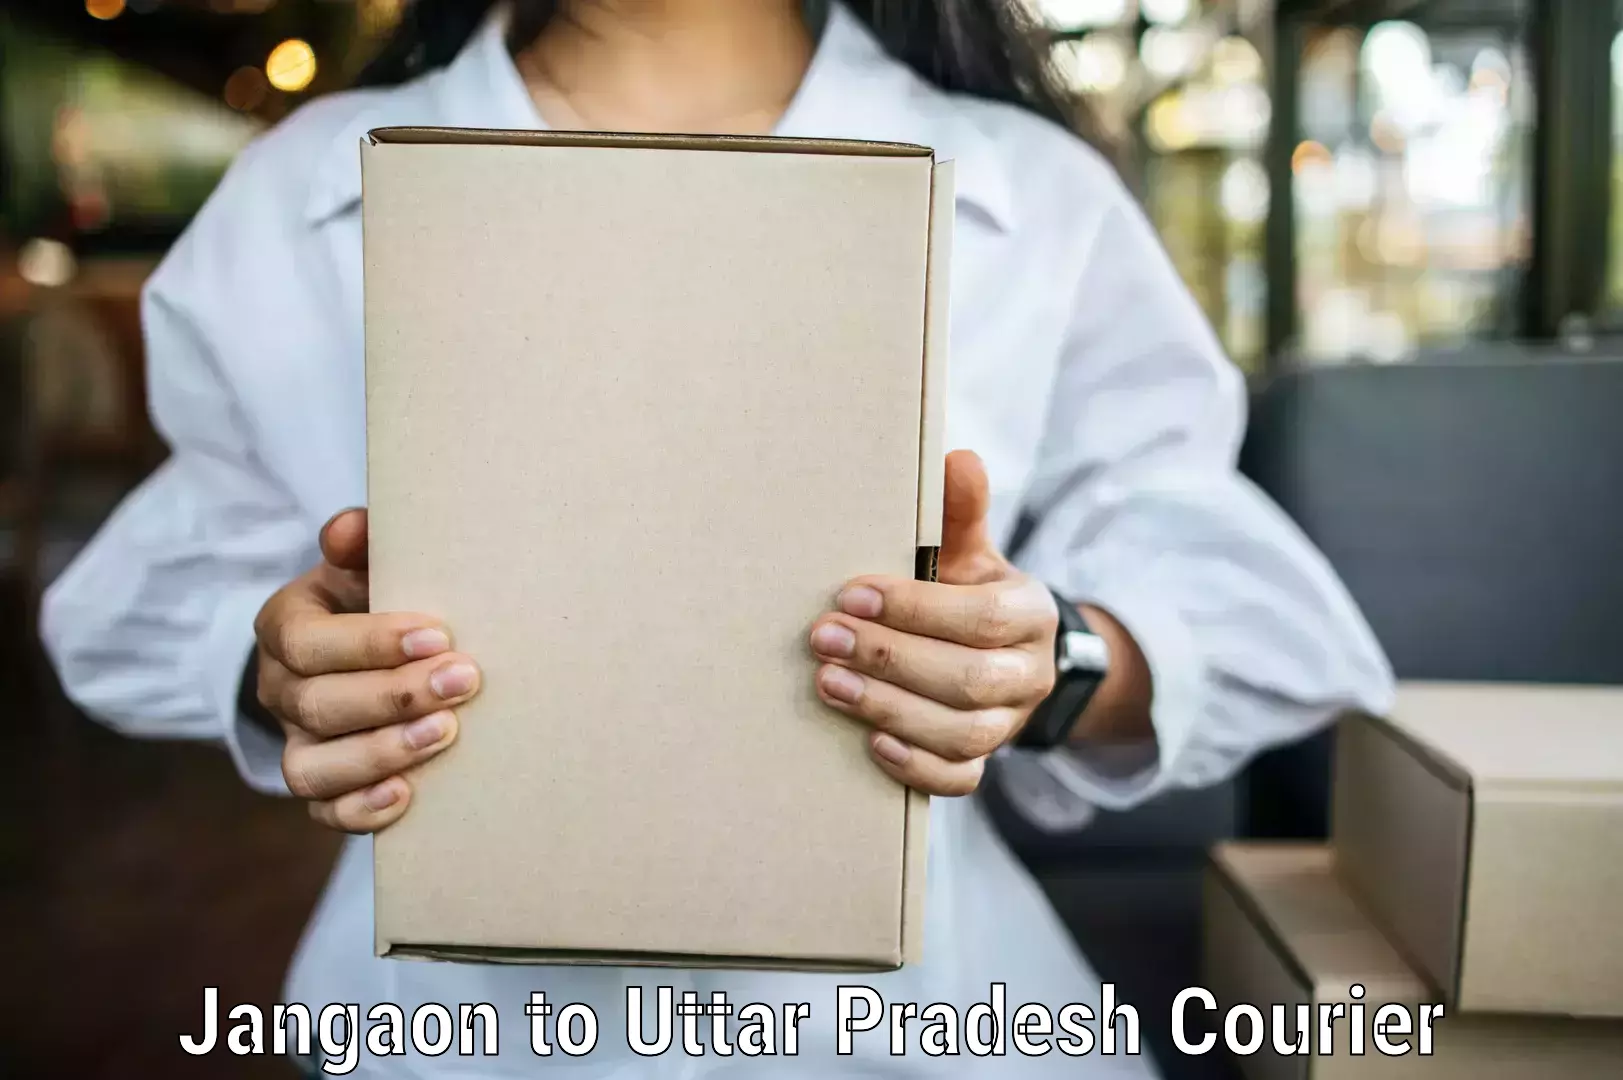 Full-service courier options Jangaon to Ghaziabad